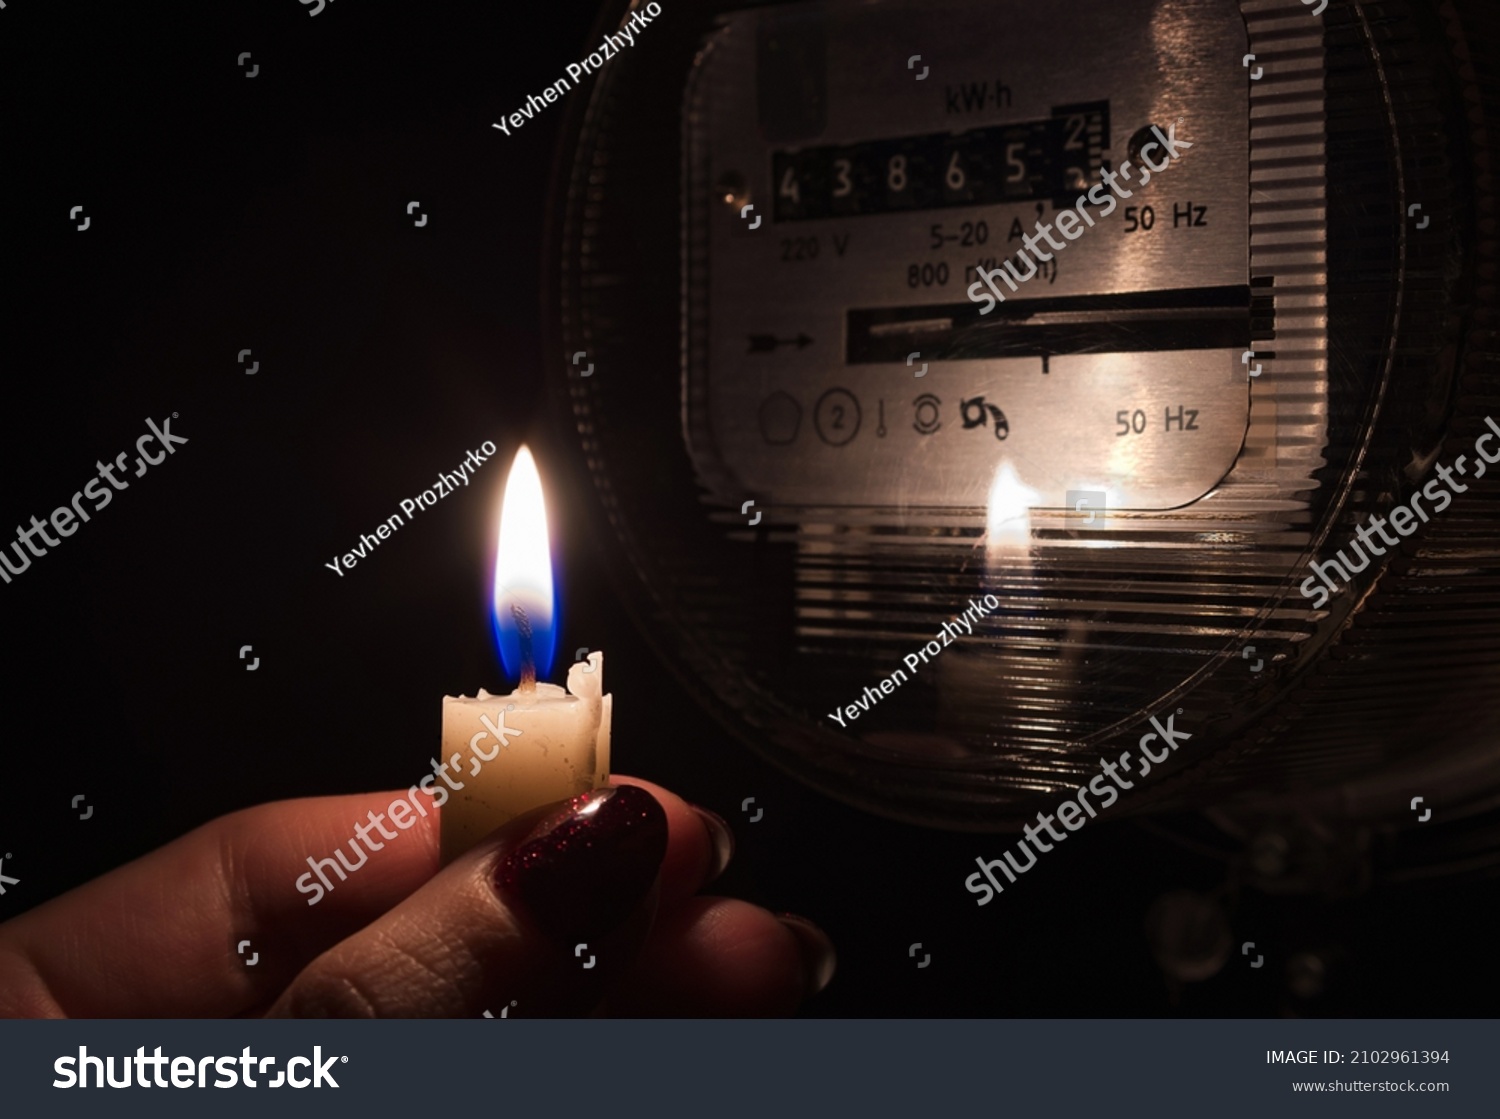 Candle shining light in the dark near electricity meter during power outage at home. Blackout city, no electricity symbolic image. #2102961394